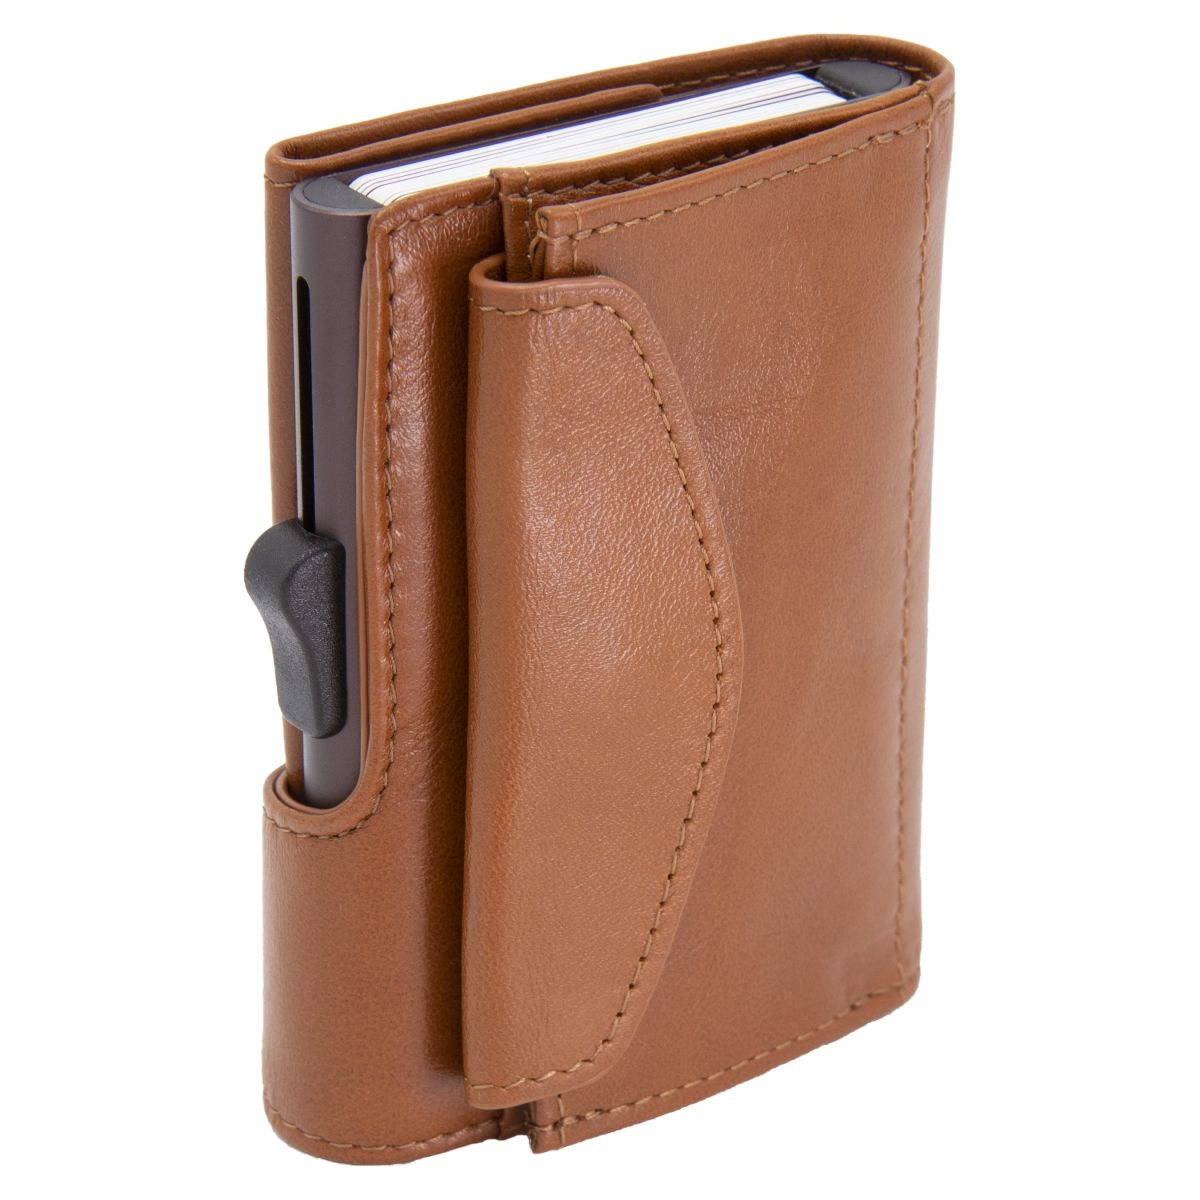 C-Secure XL Aluminum Wallet with Genuine Leather and Coins Pocket - Chestnut